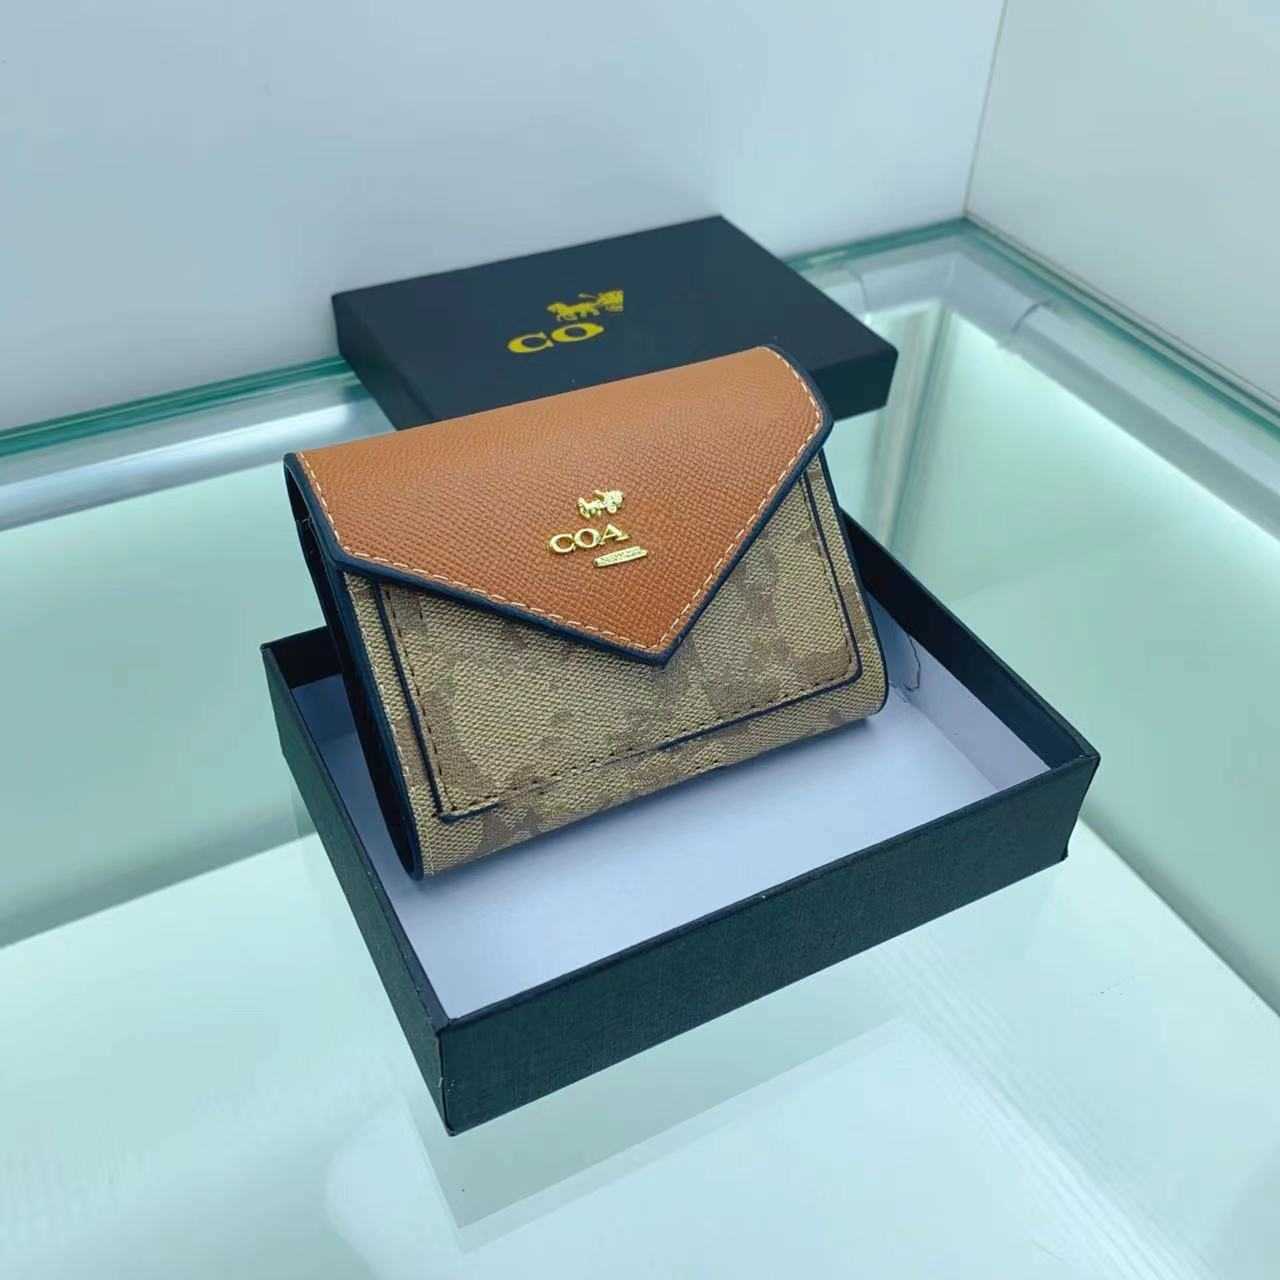 Purses 90% Off New style short fold color matching wallet Women's handbag Outlet box luxury goods